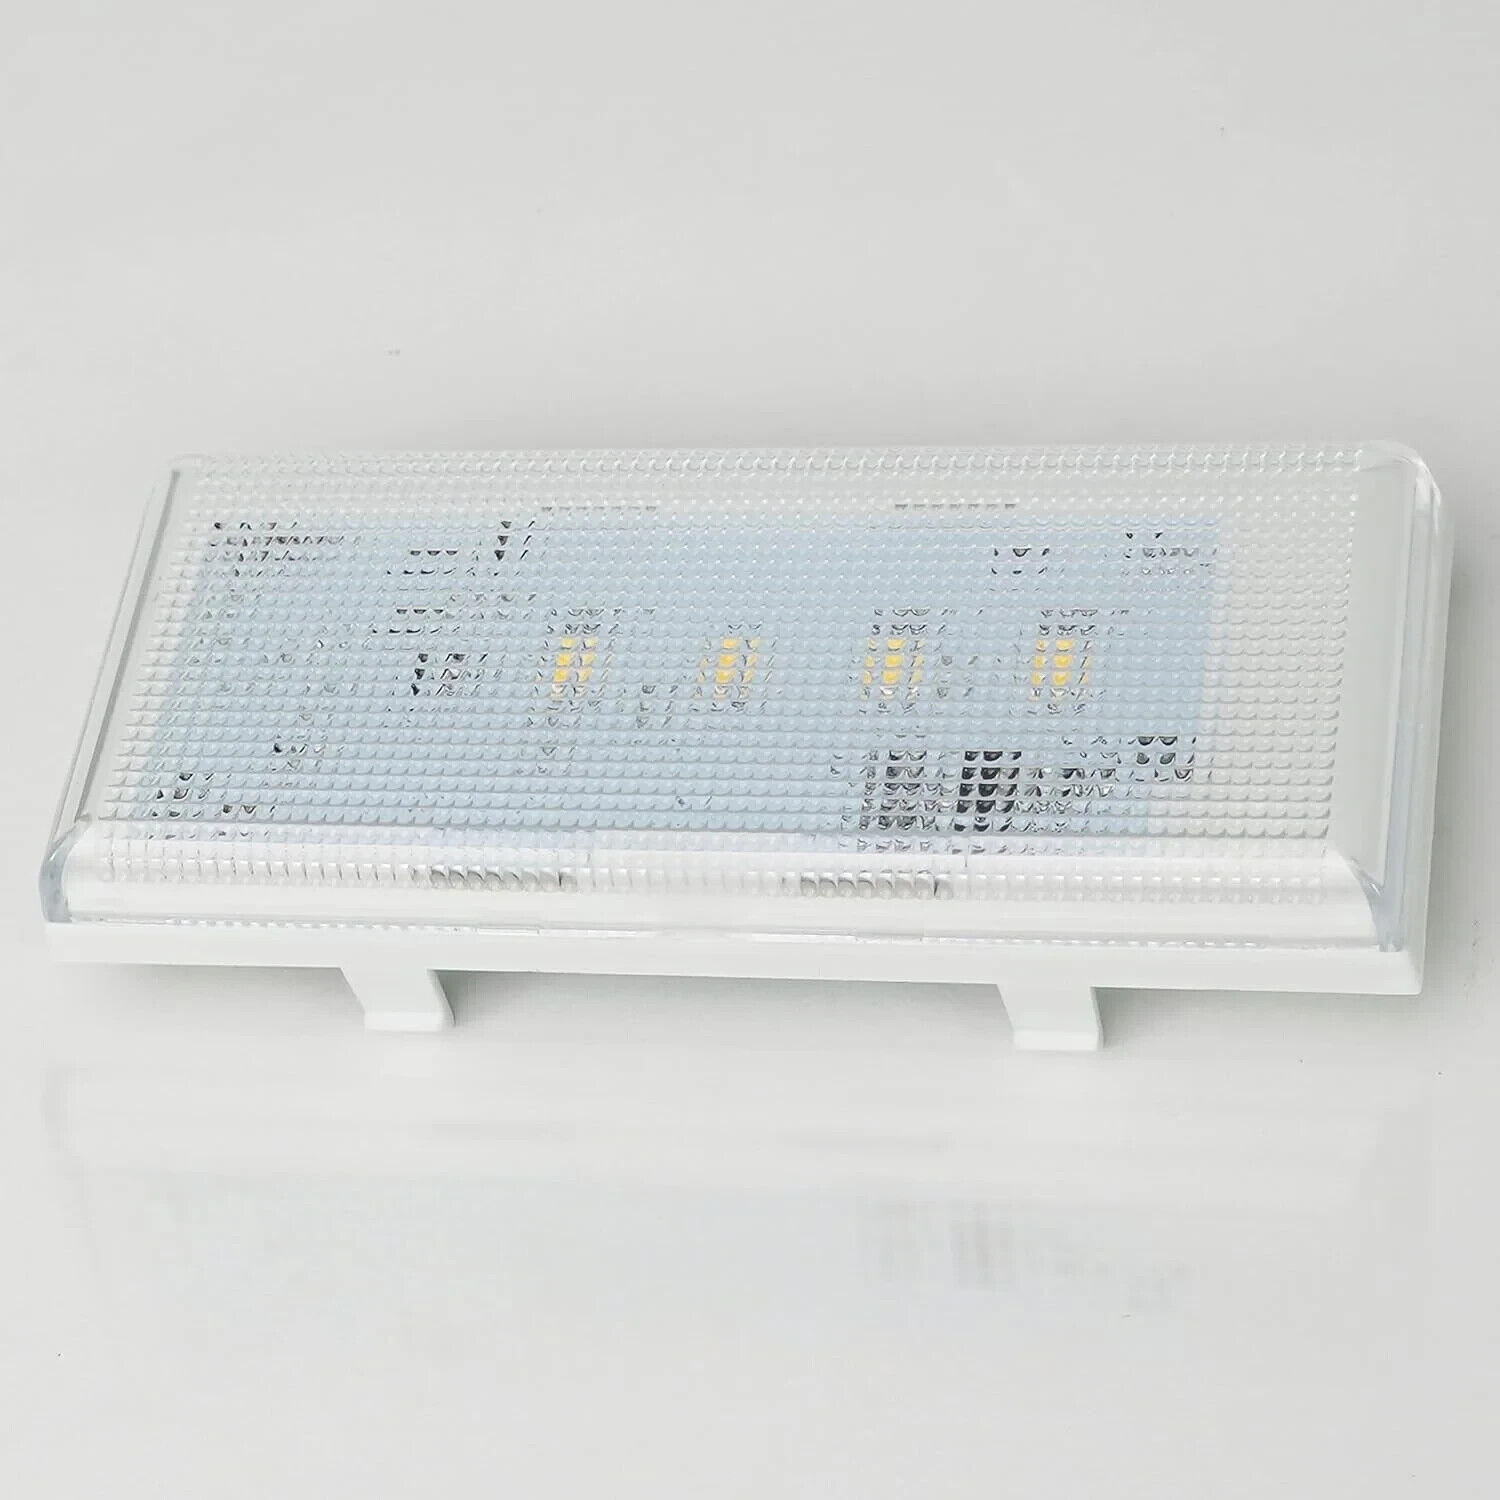 OEM Microwave Spring  For Samsung ME18H704SFB ME18H704SFS ME21H706MQB NEW - $31.55